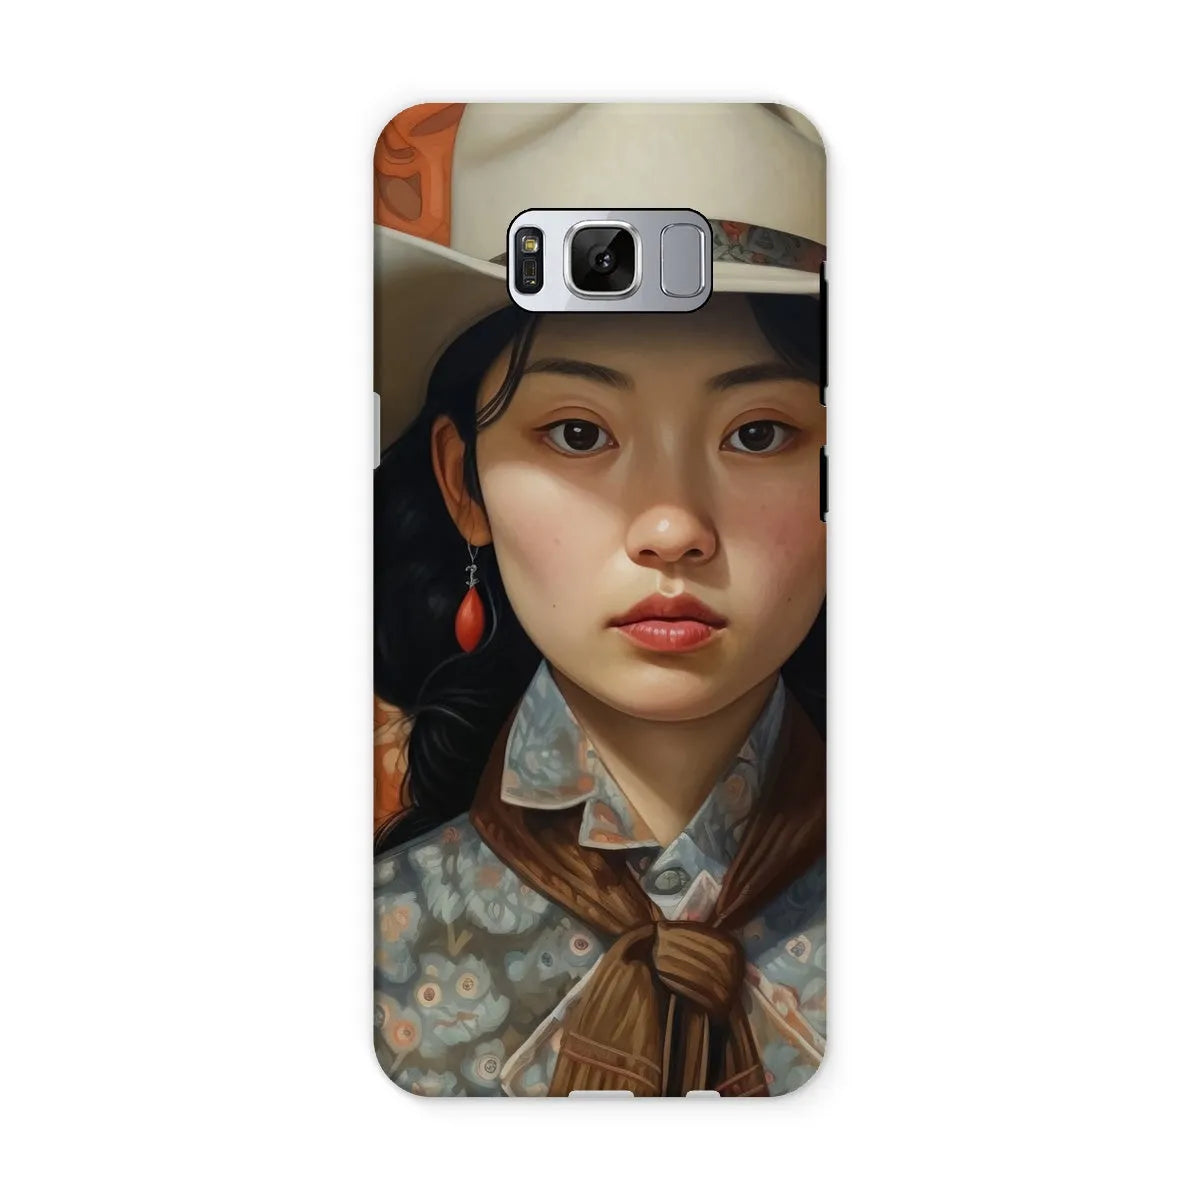 Zhi The Lesbian Cowgirl - Sapphic Art Phone Case - Samsung Galaxy S8 / Matte - Mobile Phone Cases - Aesthetic Art